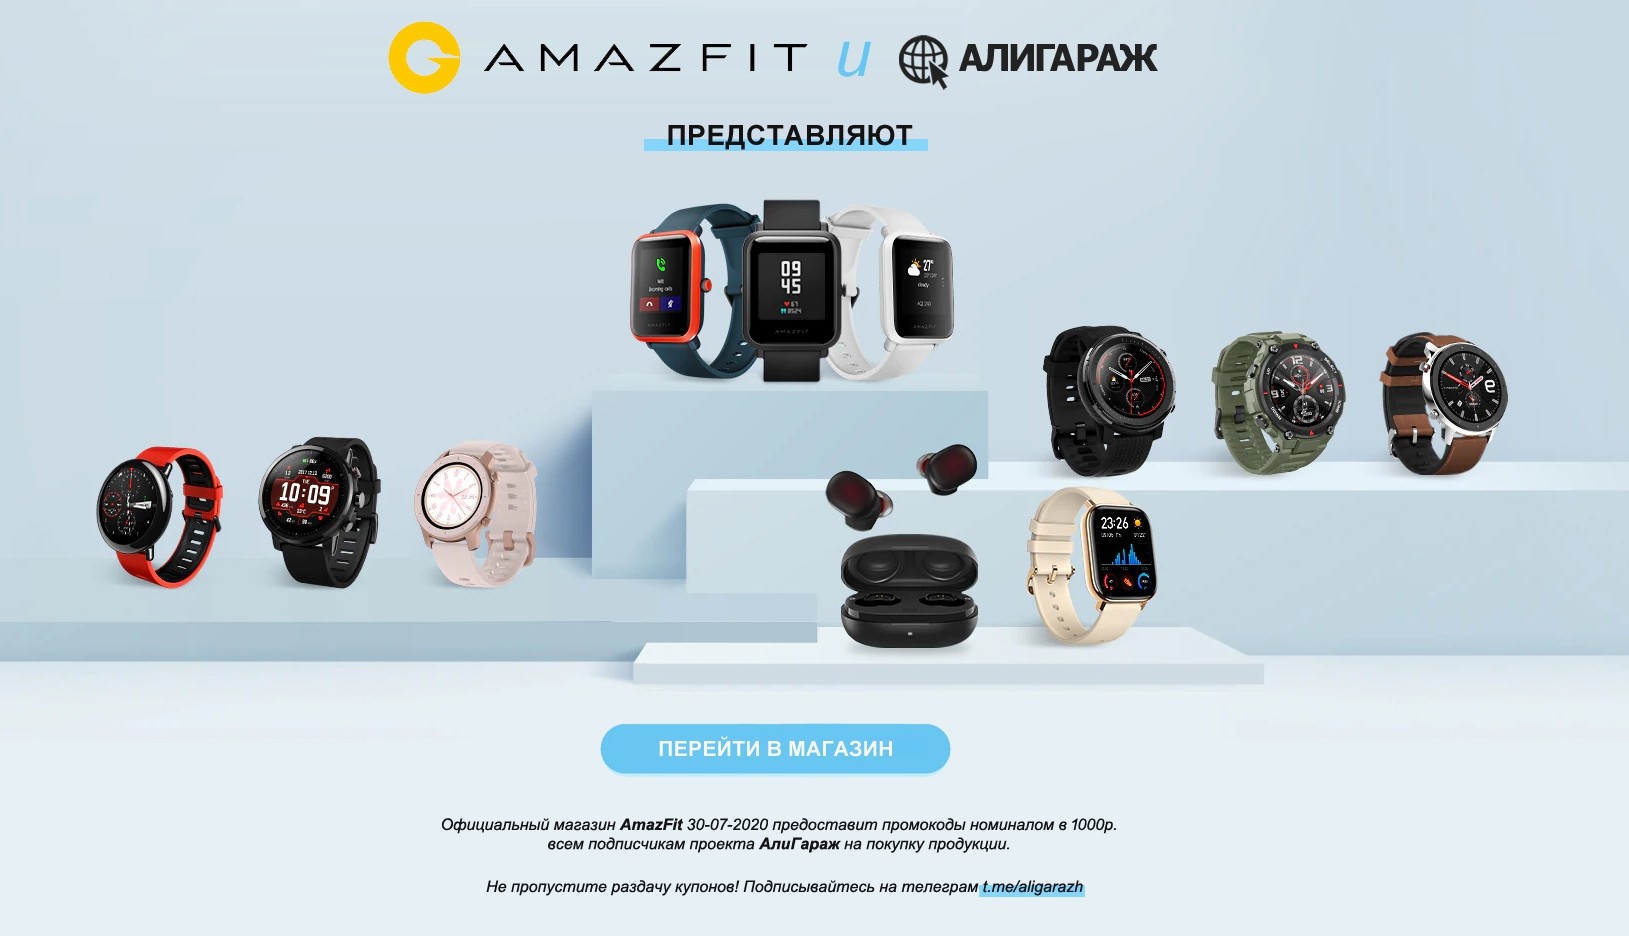 Official Amazfit store on Aliexpress